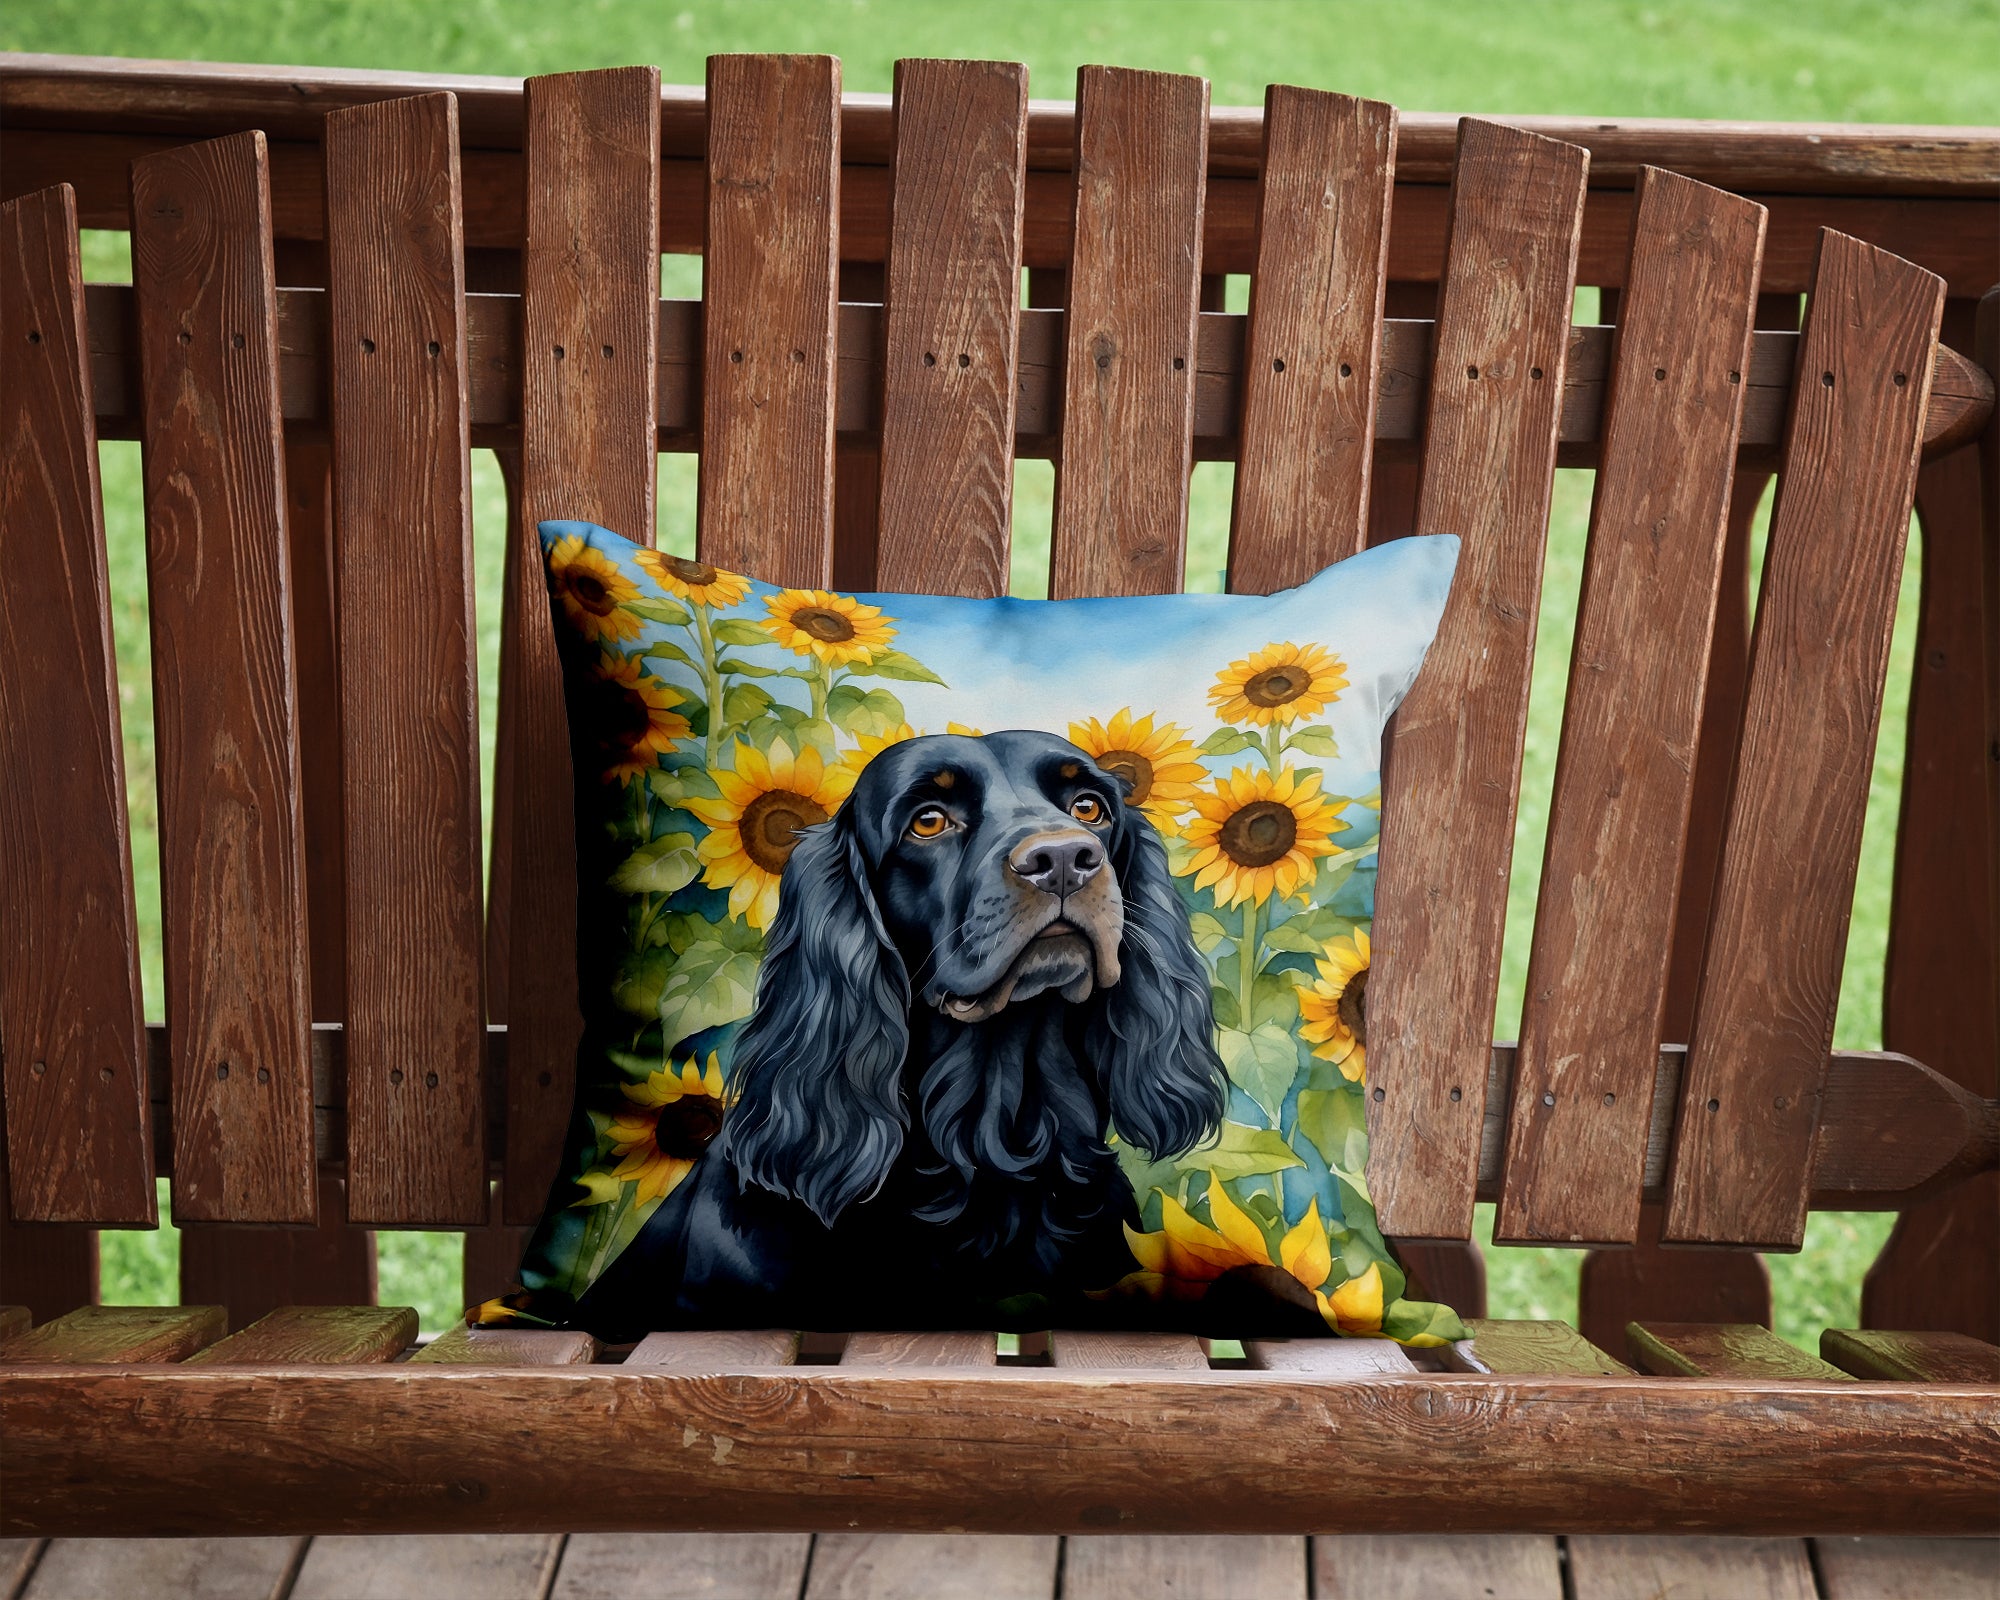 Buy this Cocker Spaniel in Sunflowers Throw Pillow